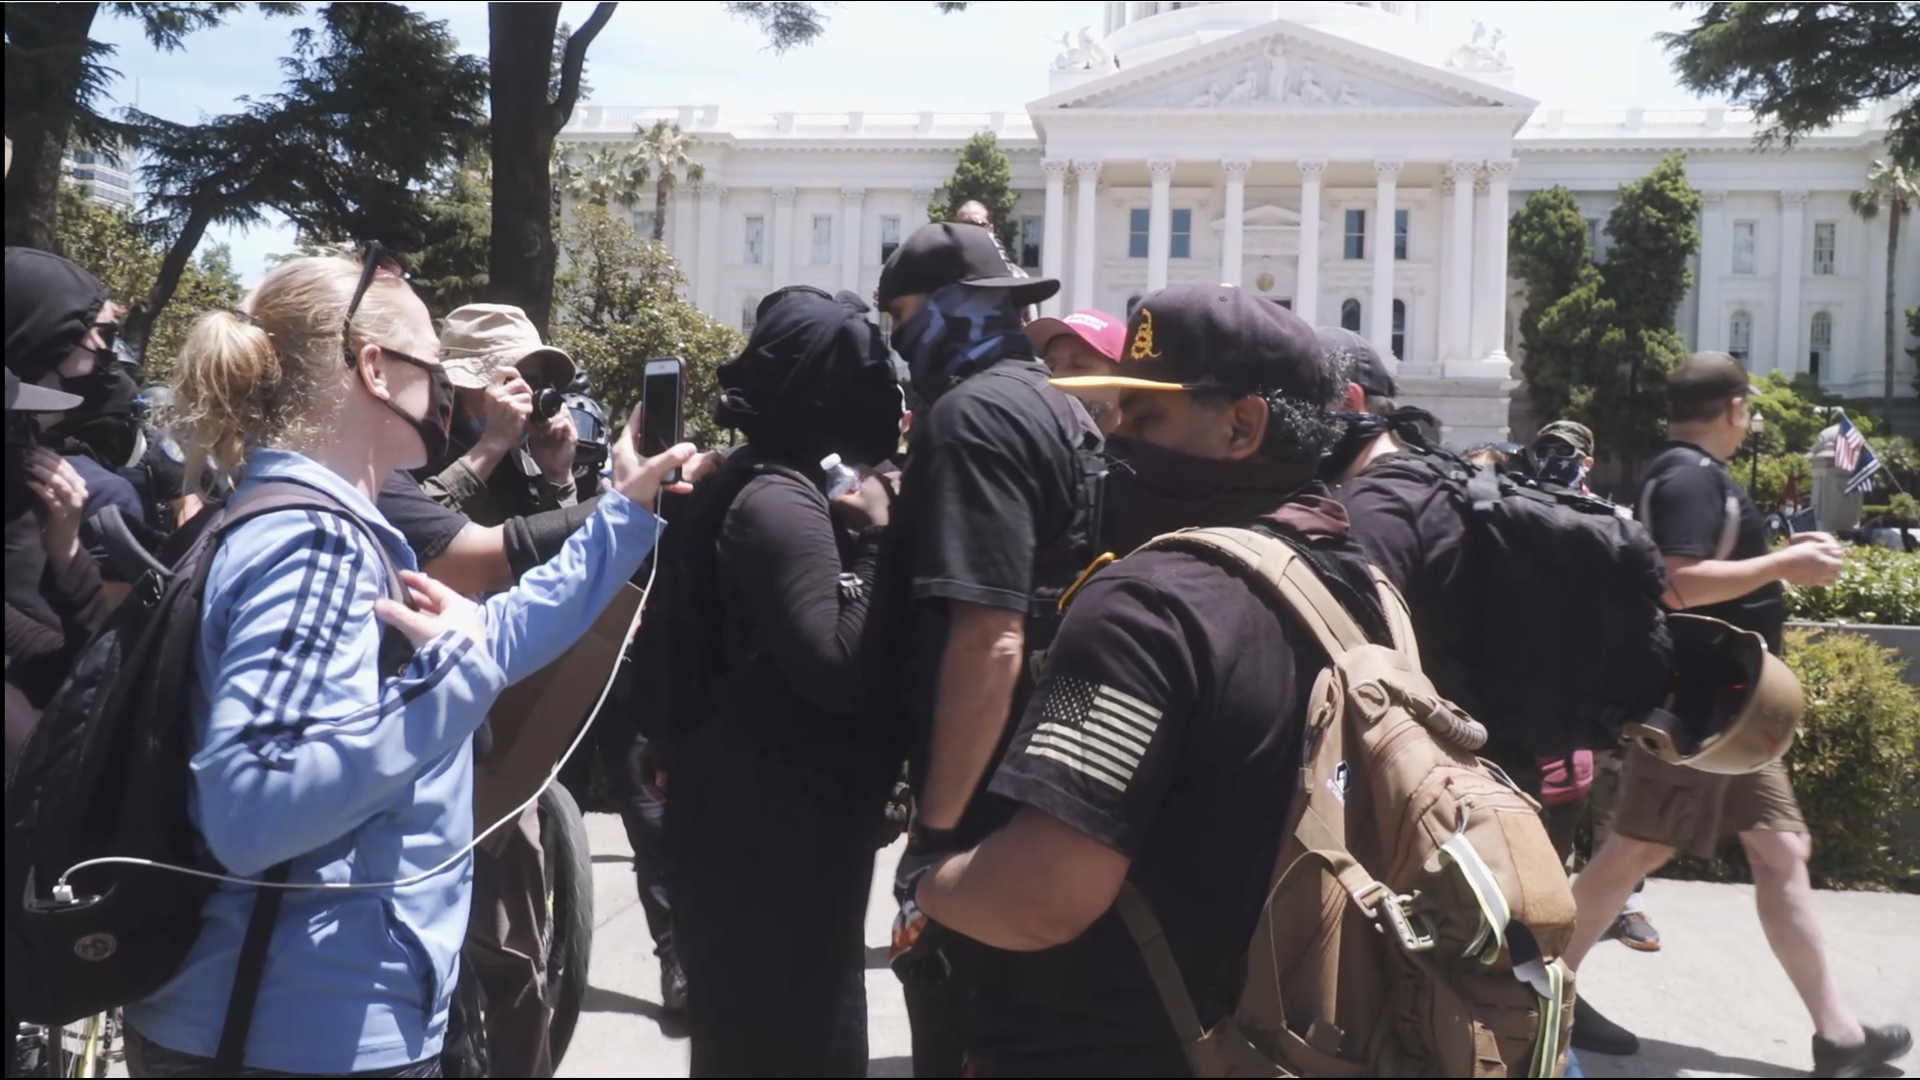 Police broke up two groups at the California State Capitol. Both groups gathered to honor the lives of two women fatally shot by law enforcement.